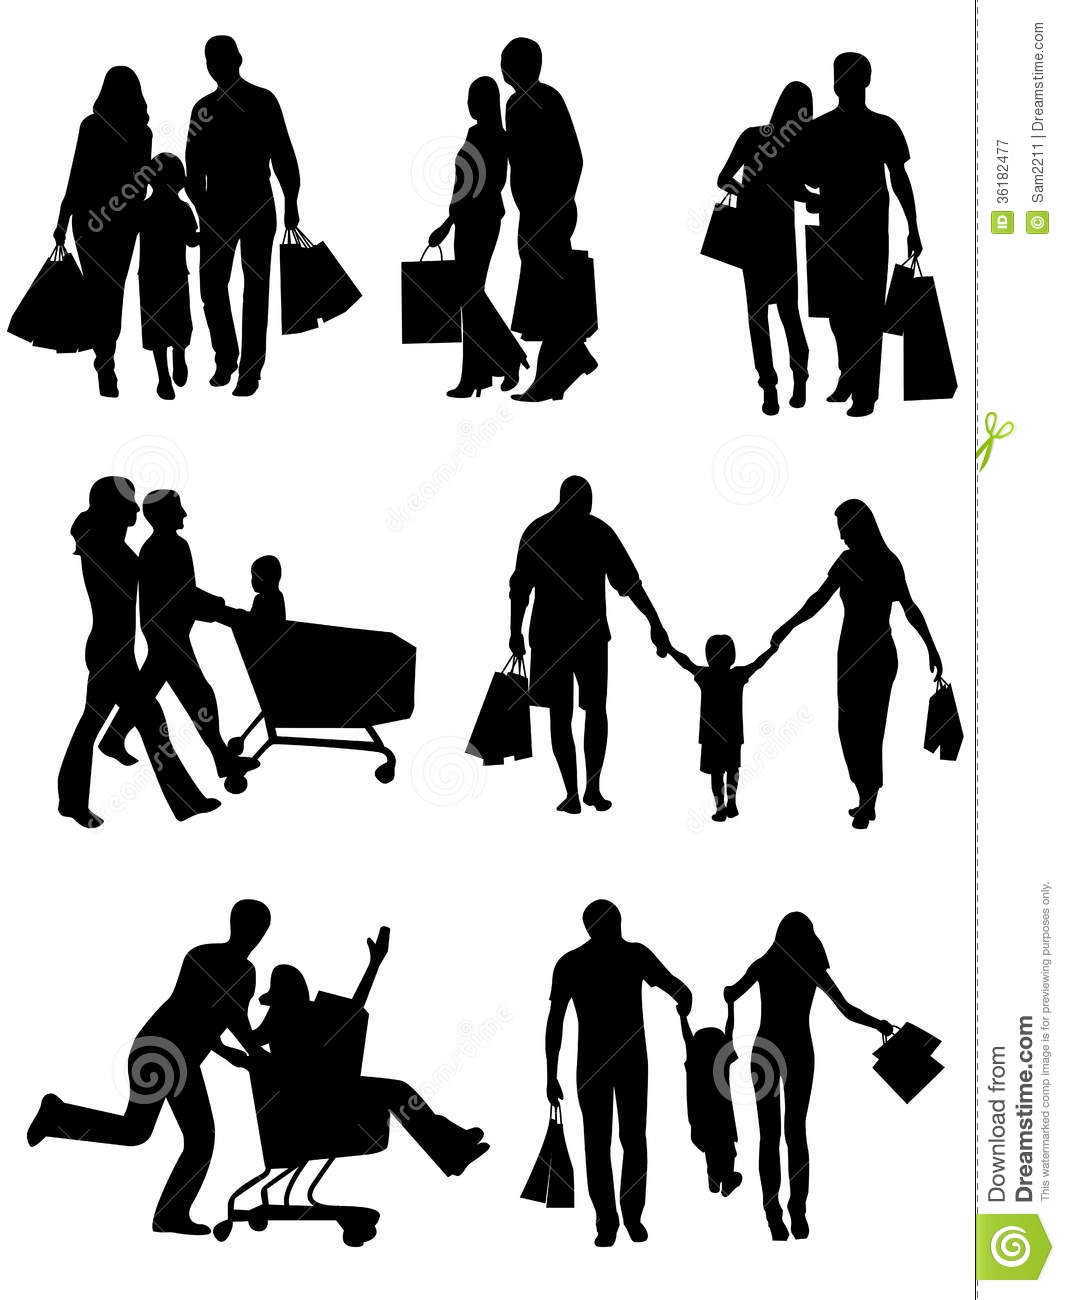 Family Shopping Silhouette Vectors